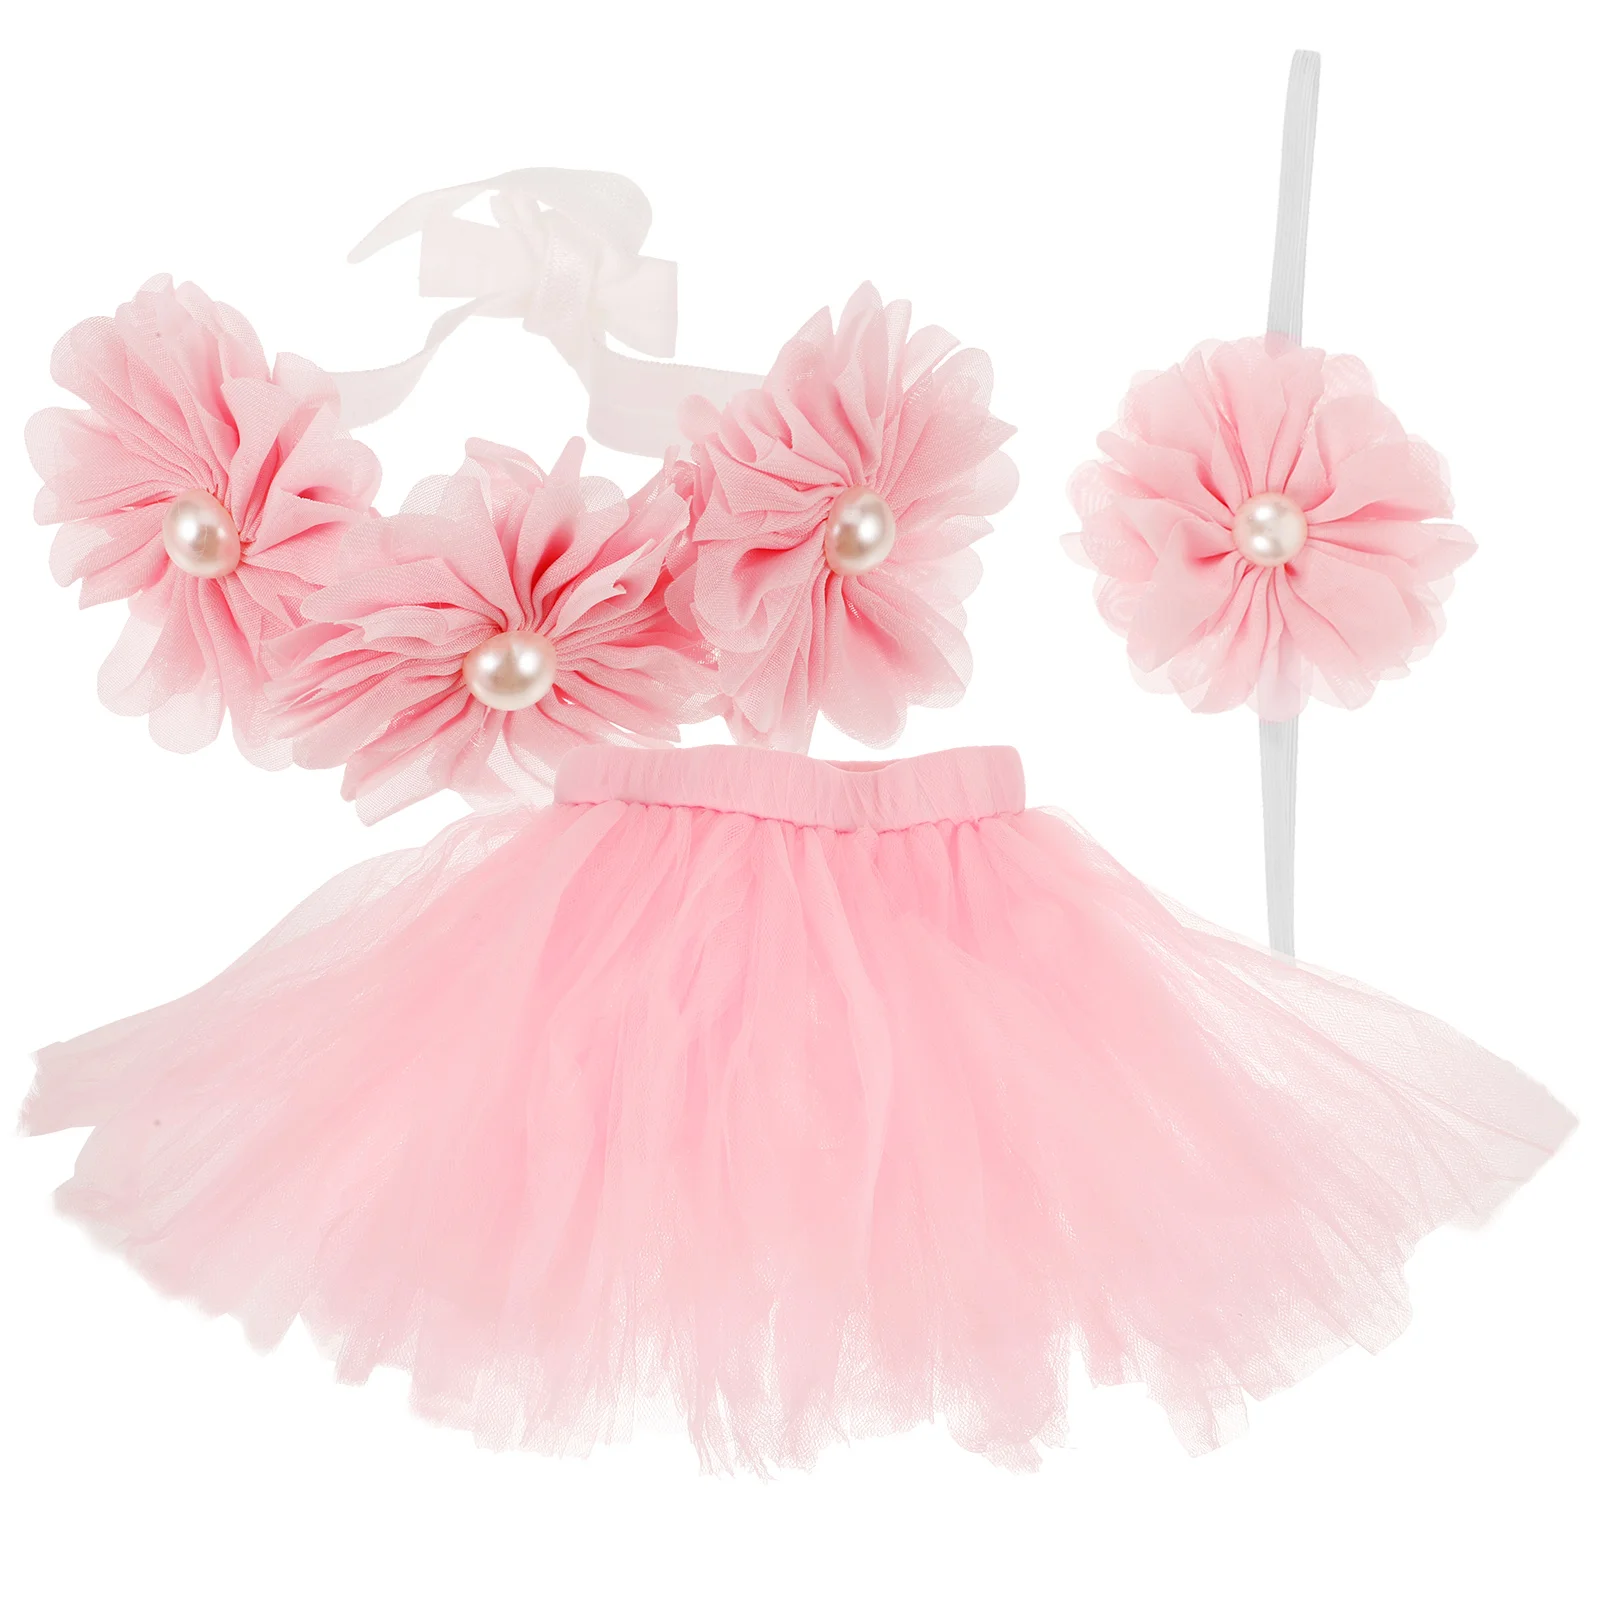 

Baby Tutu Photography Clothes Costume Toddler Girl Prop Infant Skirt Outfit Girls